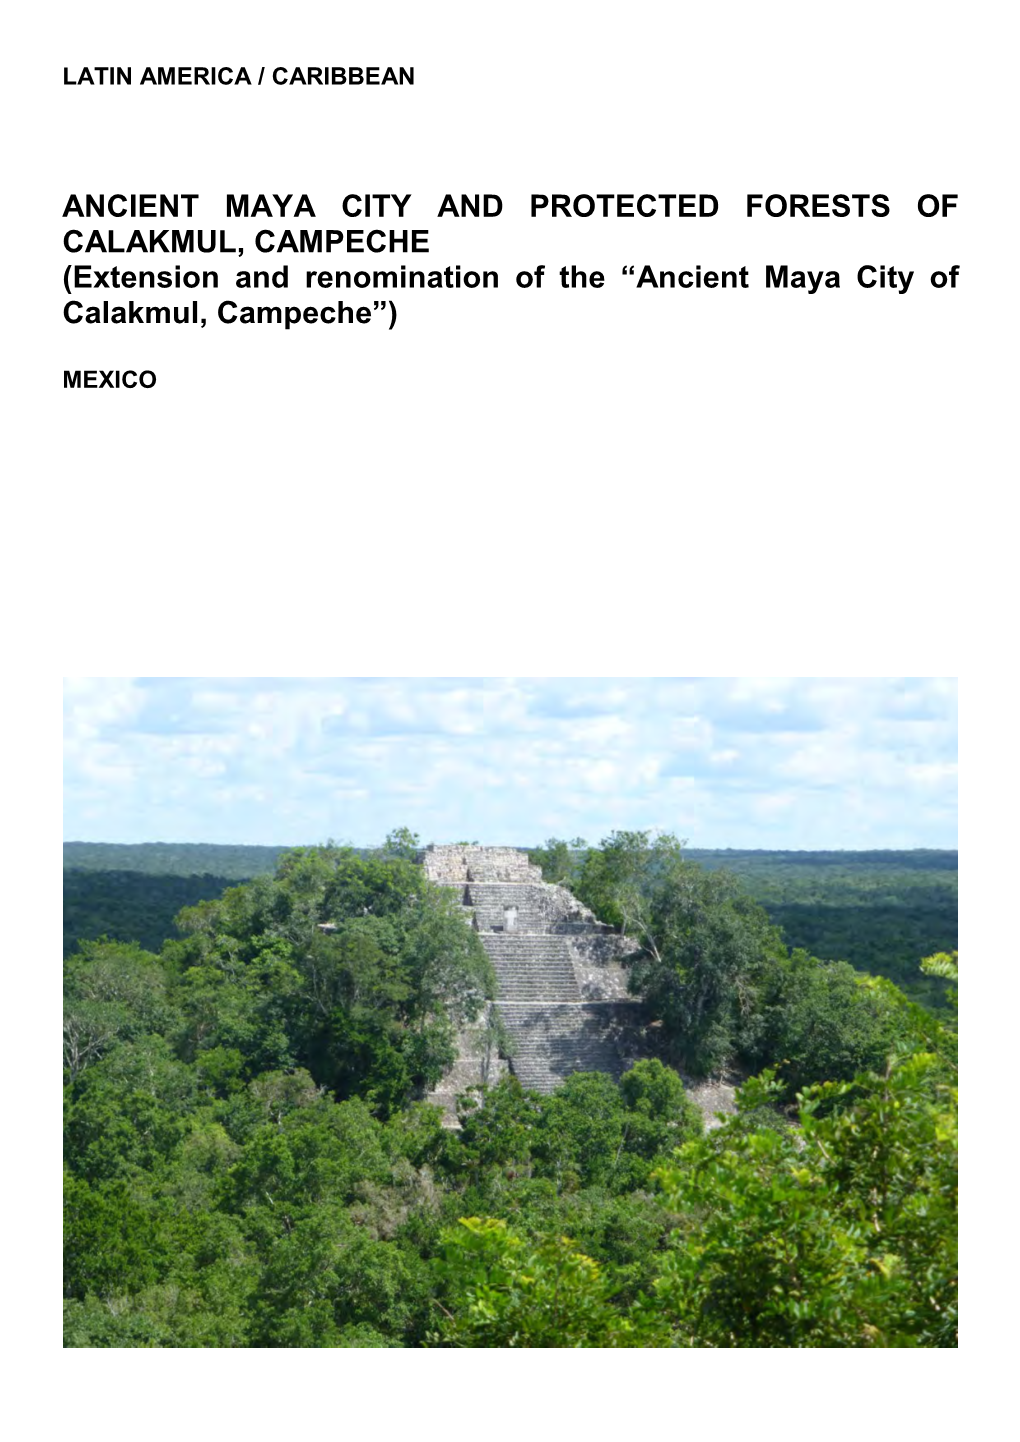 Extension and Renomination of the “Ancient Maya City of Calakmul, Campeche”)